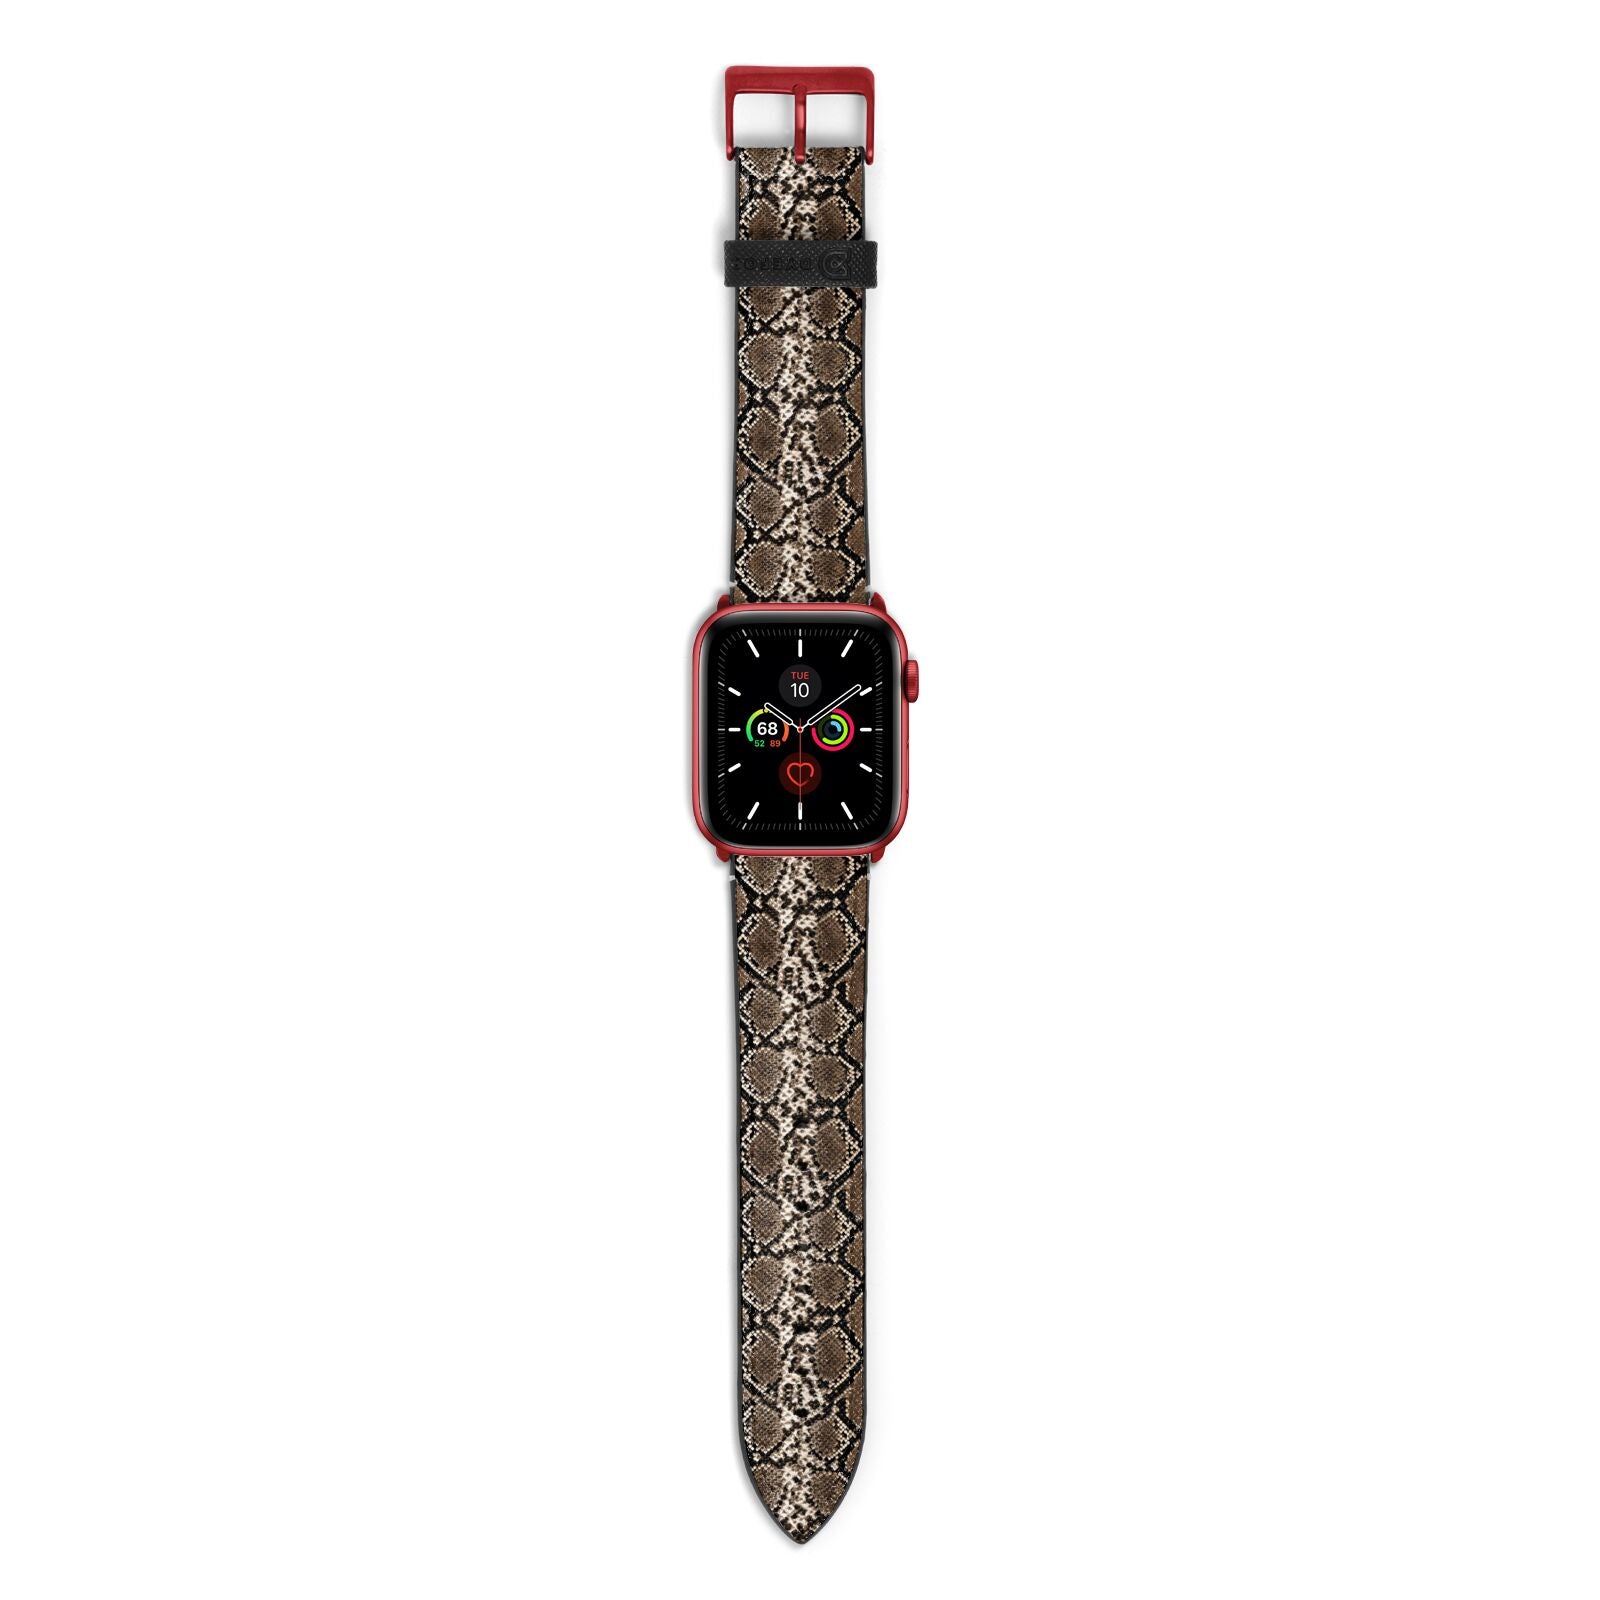 Snakeskin Pattern Apple Watch Strap with Red Hardware